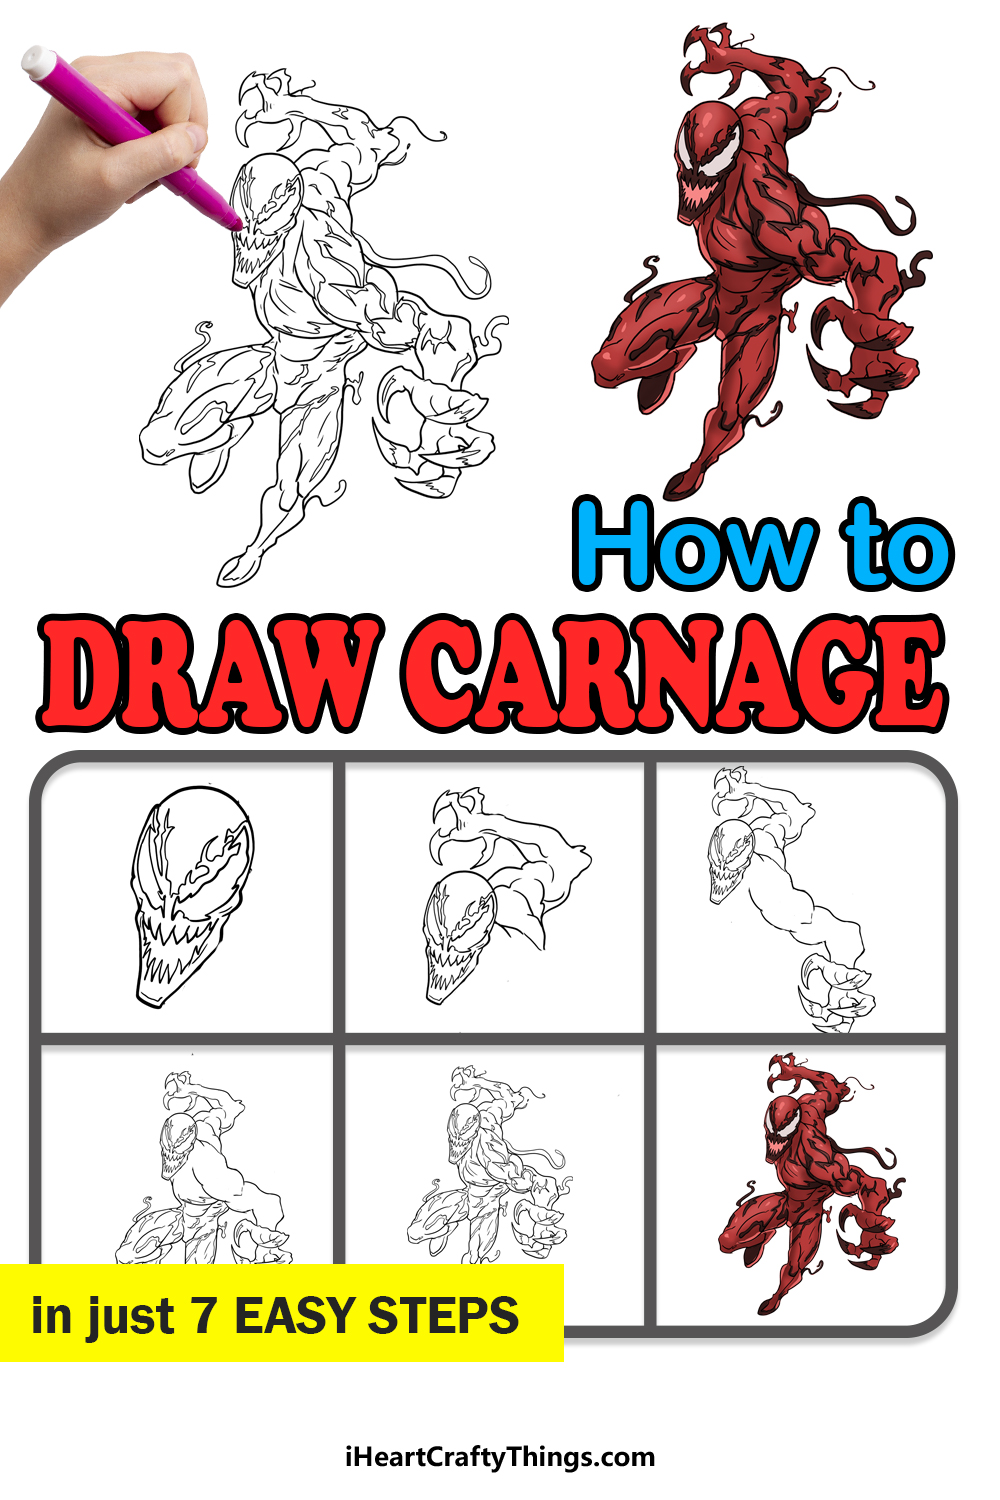 How to Draw Carnage step by step guide